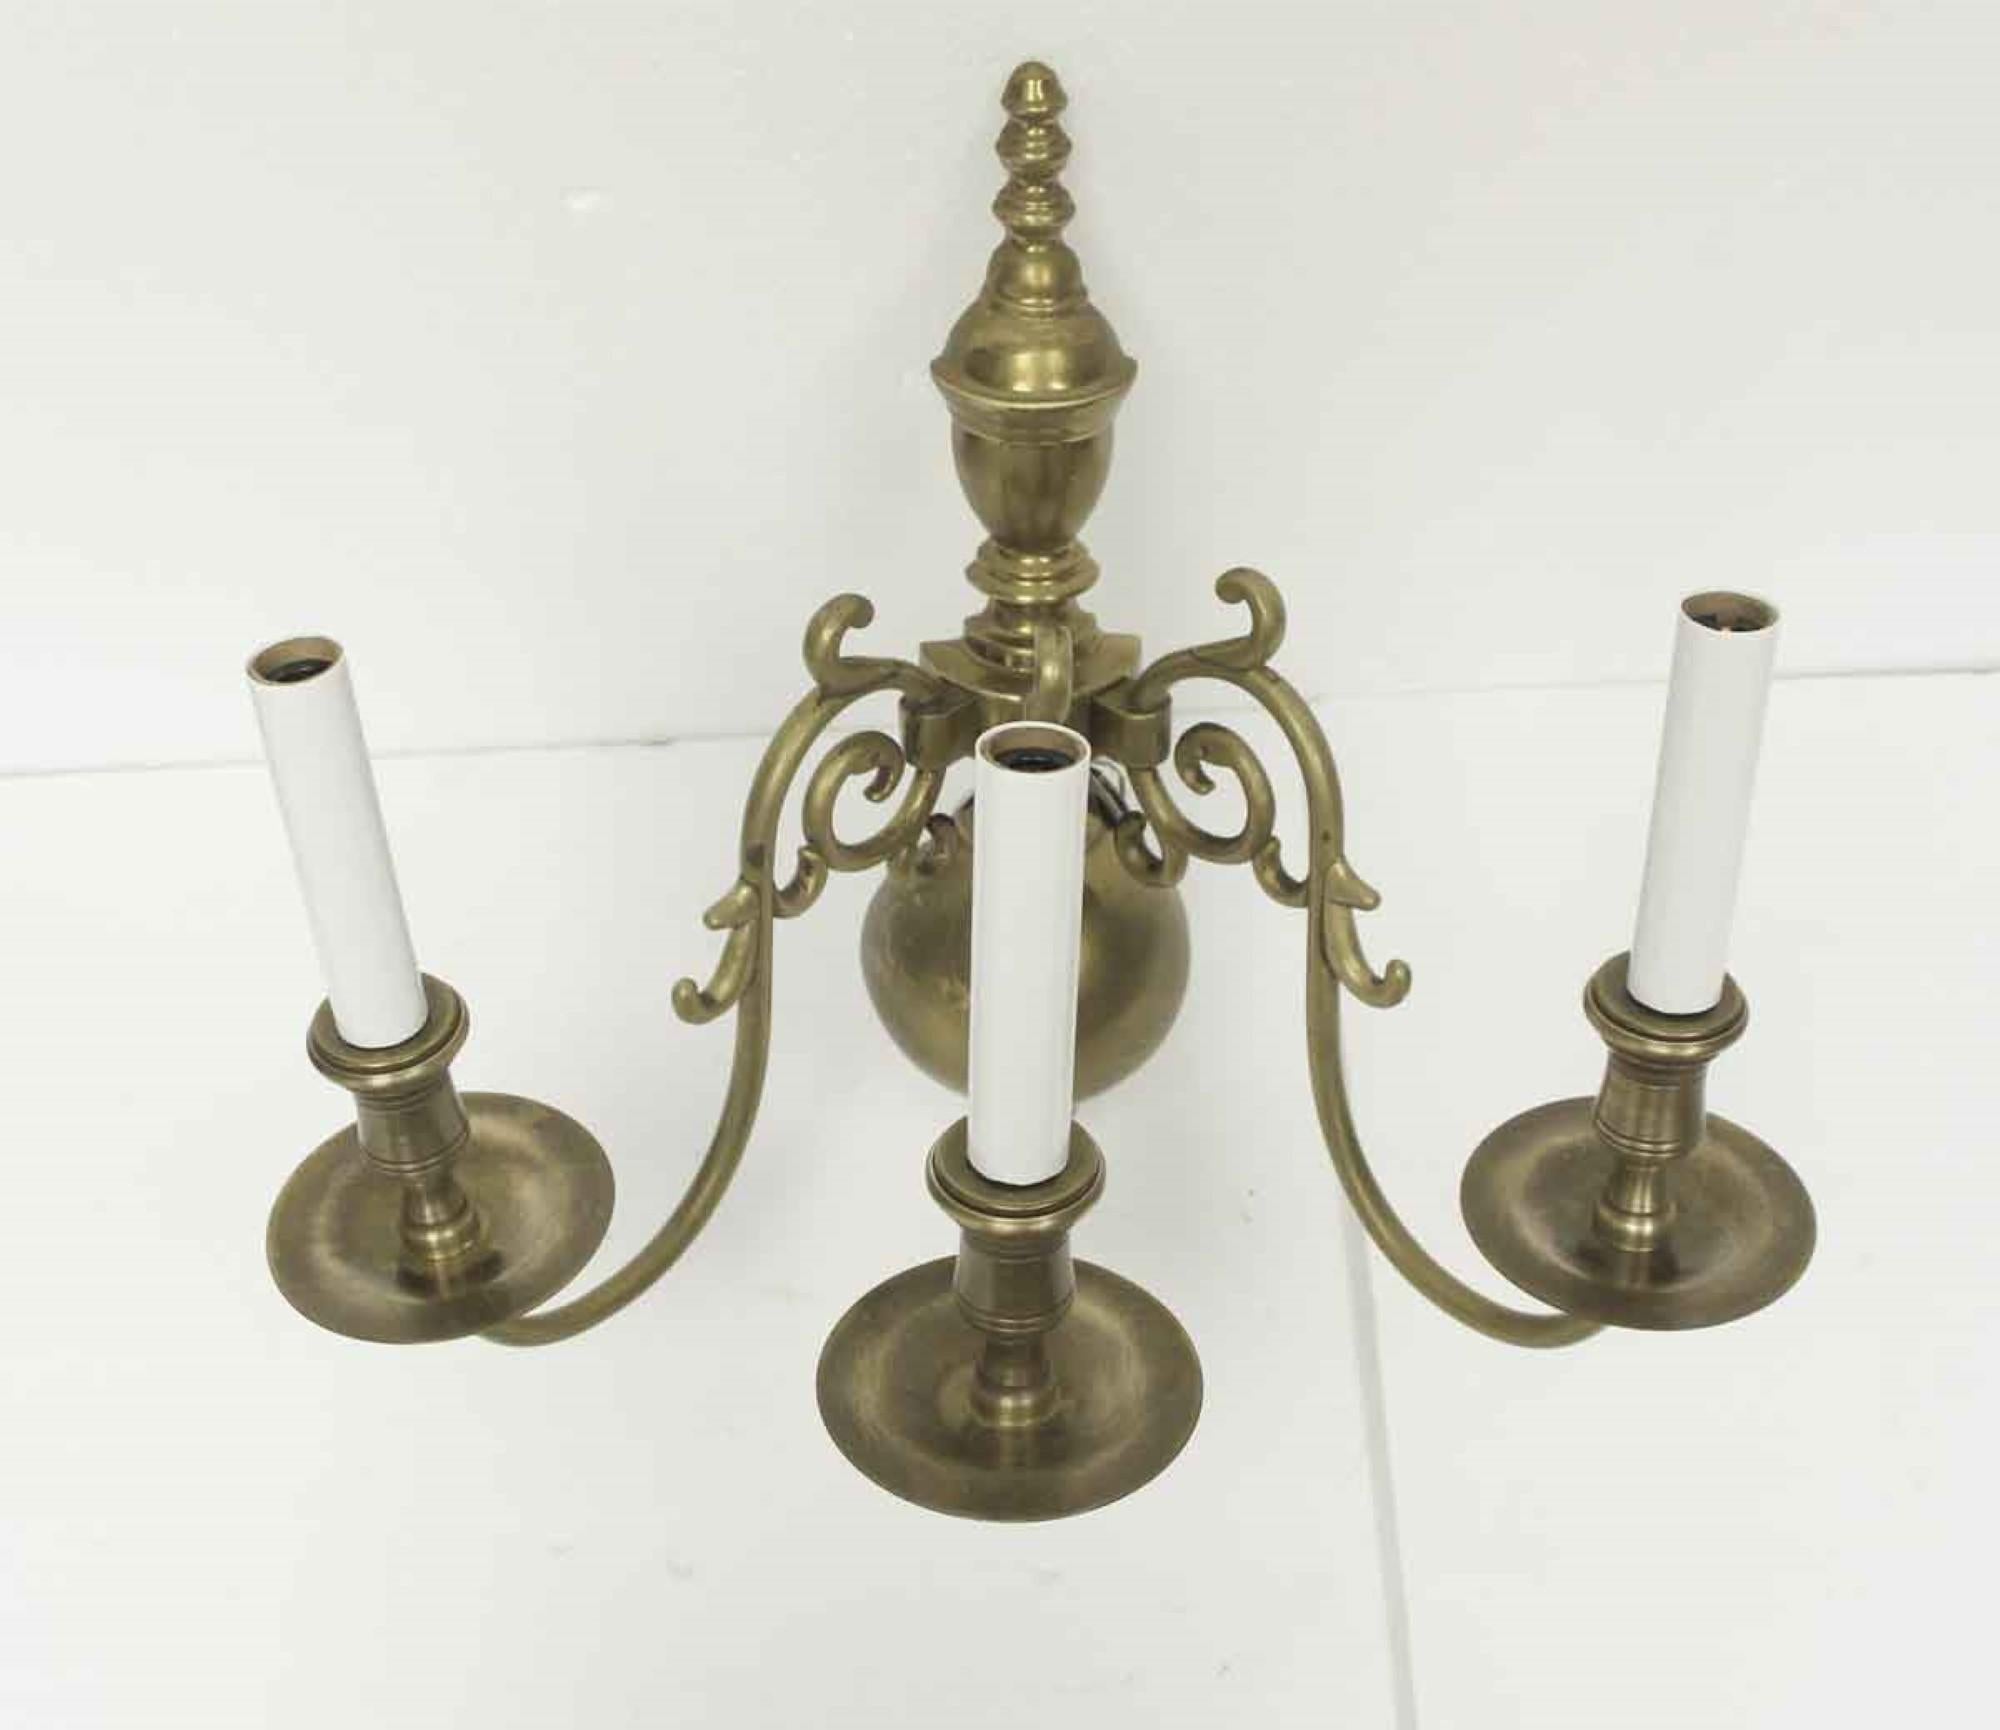 1970s 3 arm wall sconce done in the Williamsburg style. Made of cast brass. Uses candelabra bulbs. Cleaned and rewired. Small quantity available at time of posting. Priced each. Please inquire. Please note, this item is located in our Scranton, PA